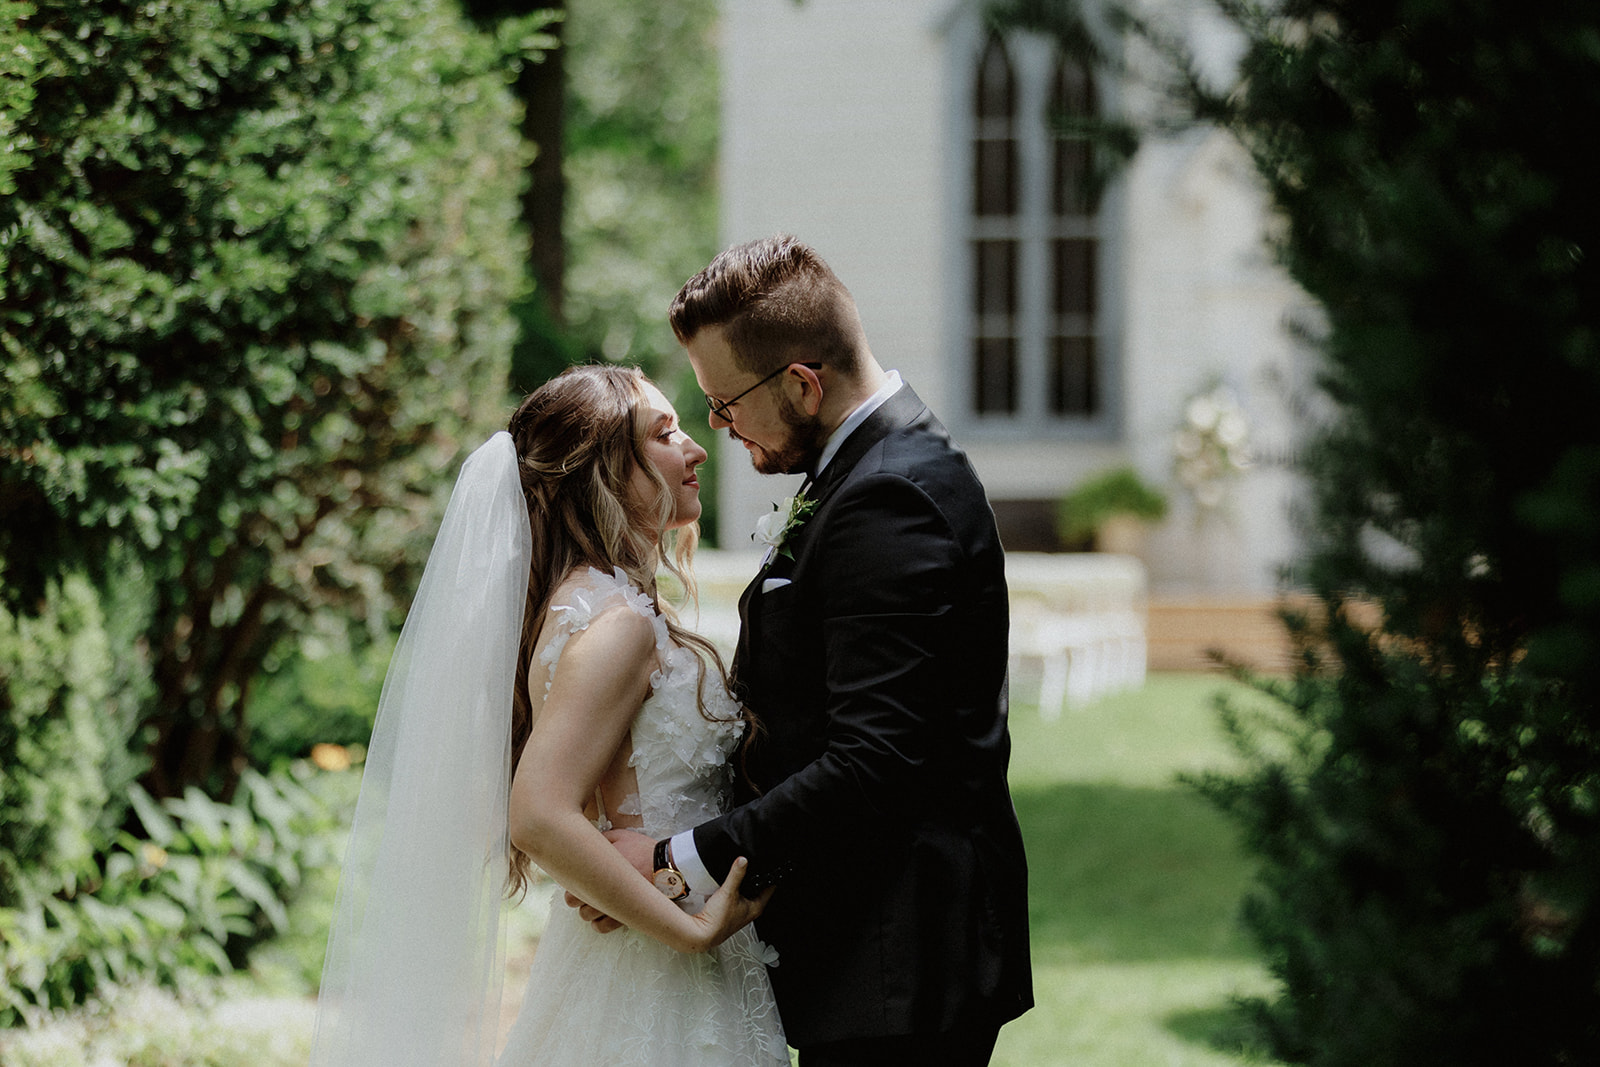 A bride and groom share a tender moment outdoors.